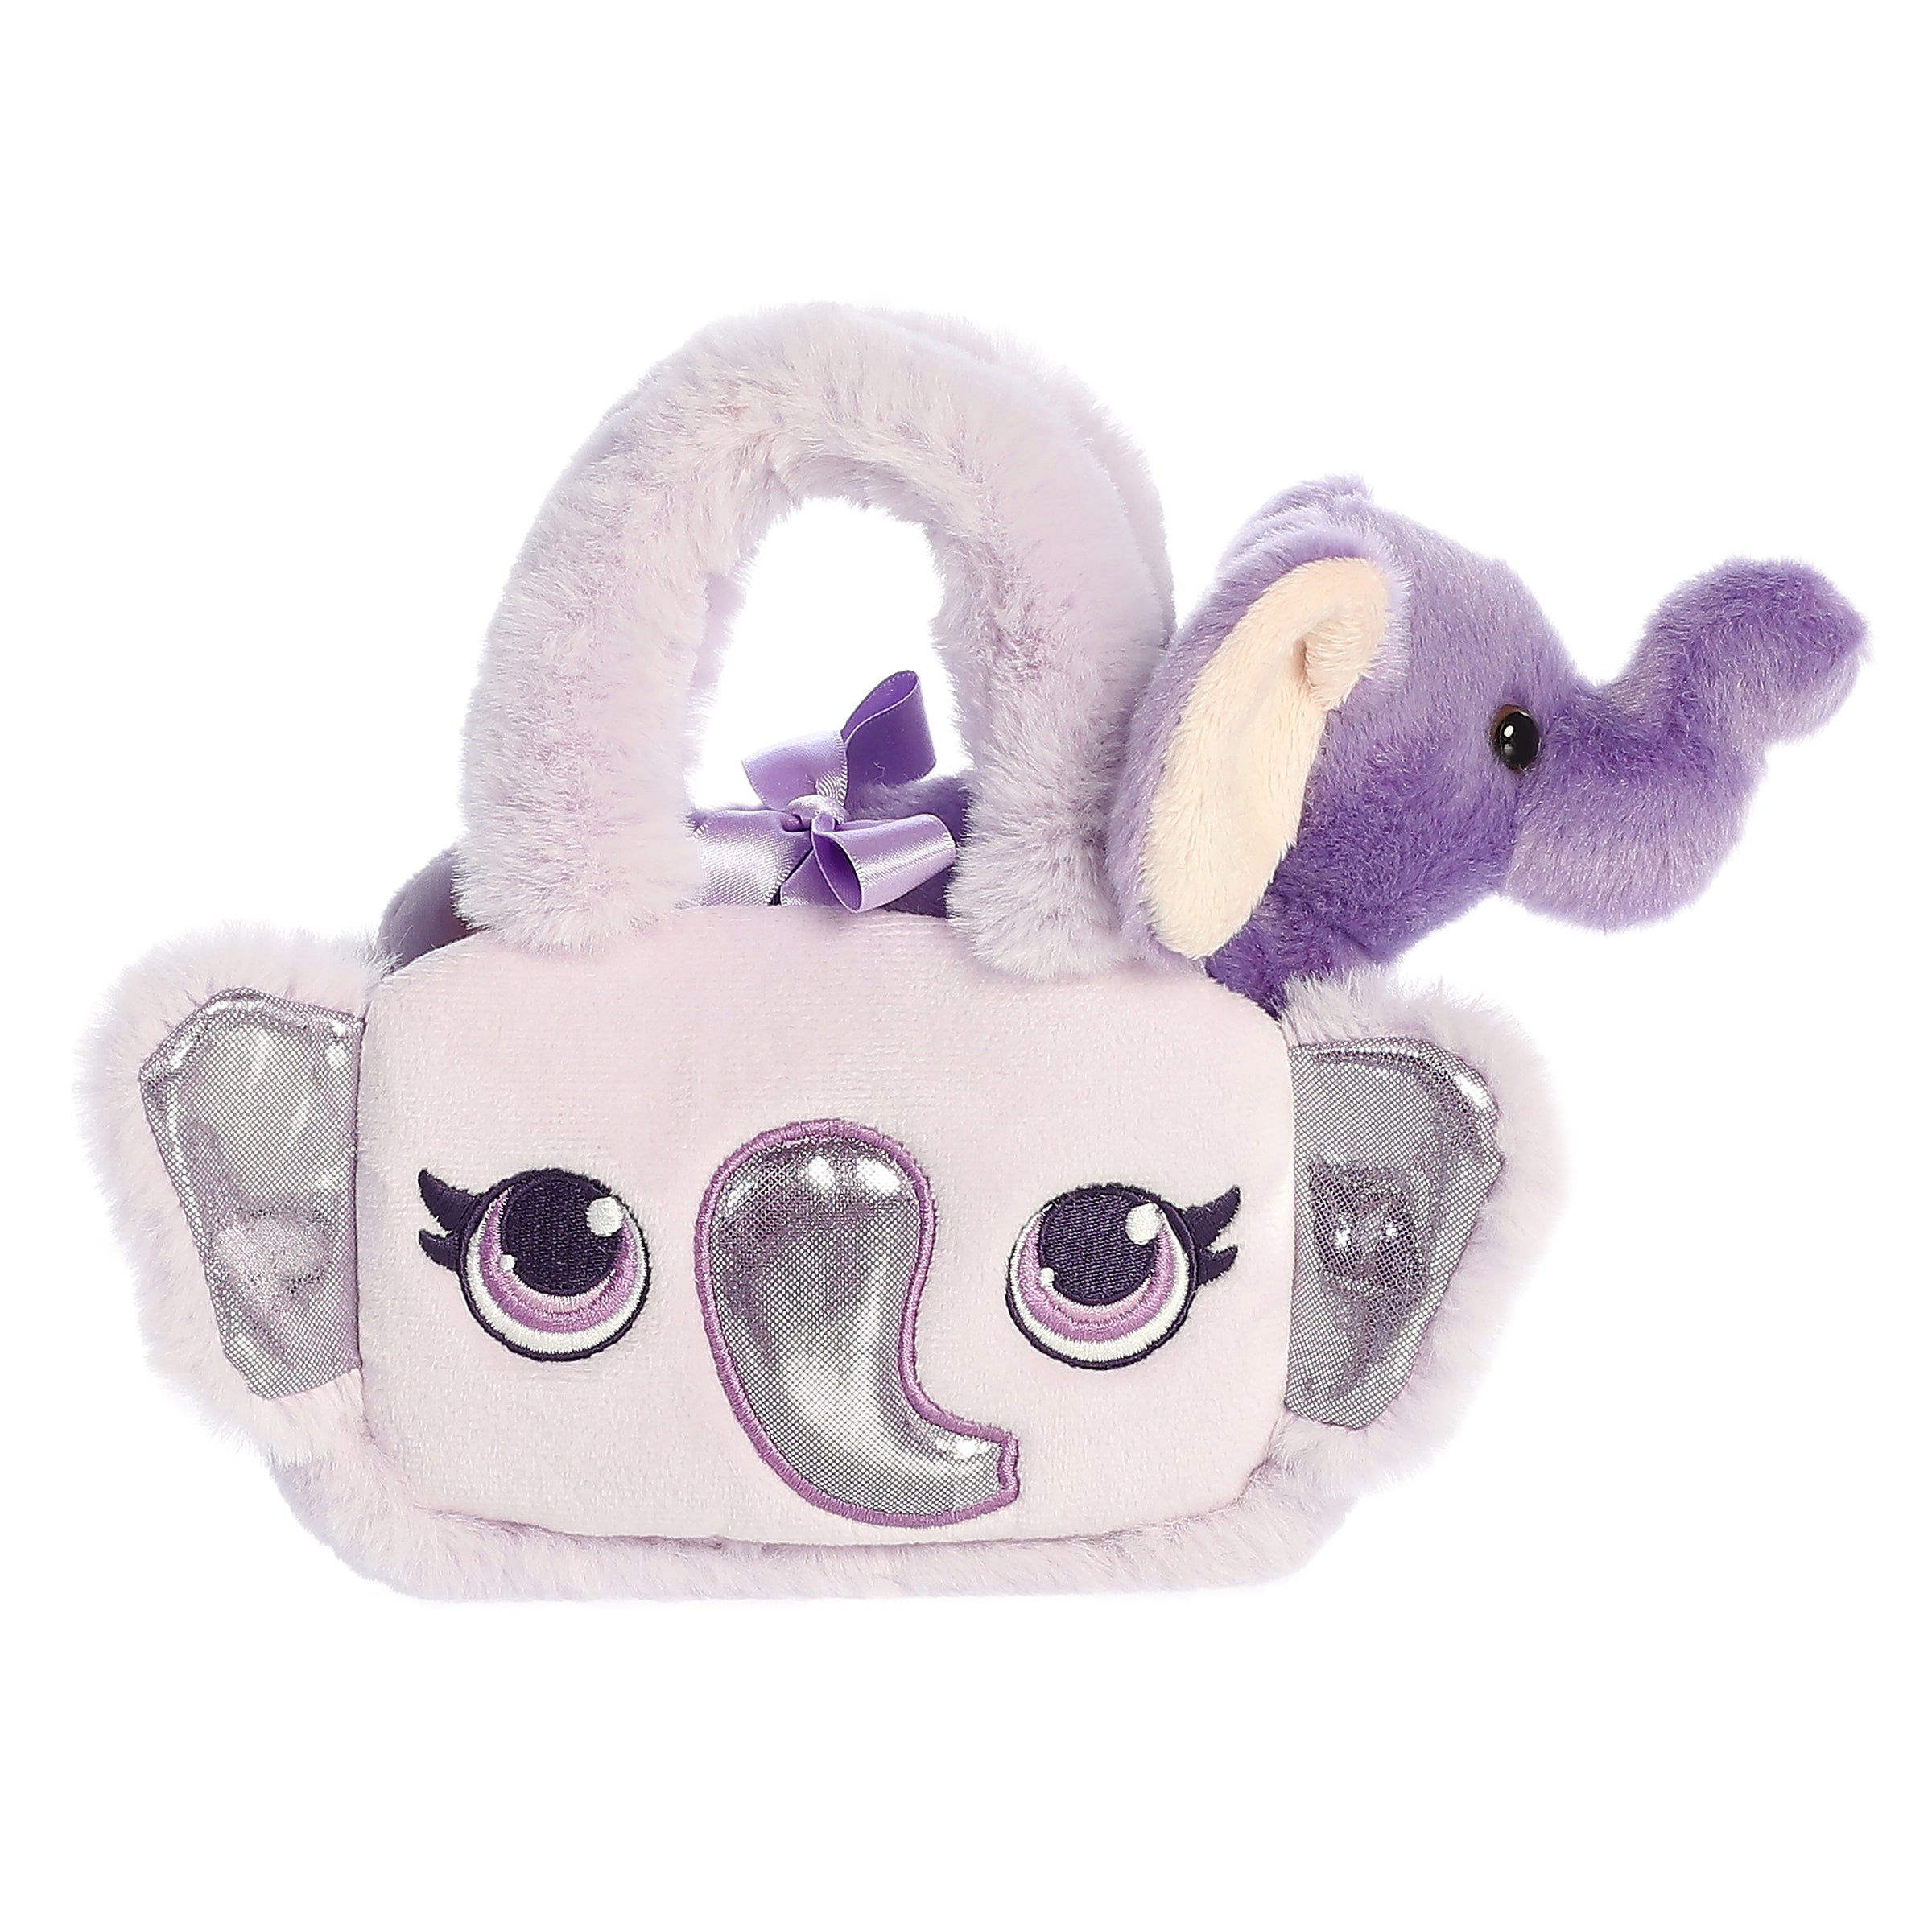 Dark purple Glitter Elephant carrier from Aurora's Fancy Pals with lighter elephant designs, ready for whimsical adventures.